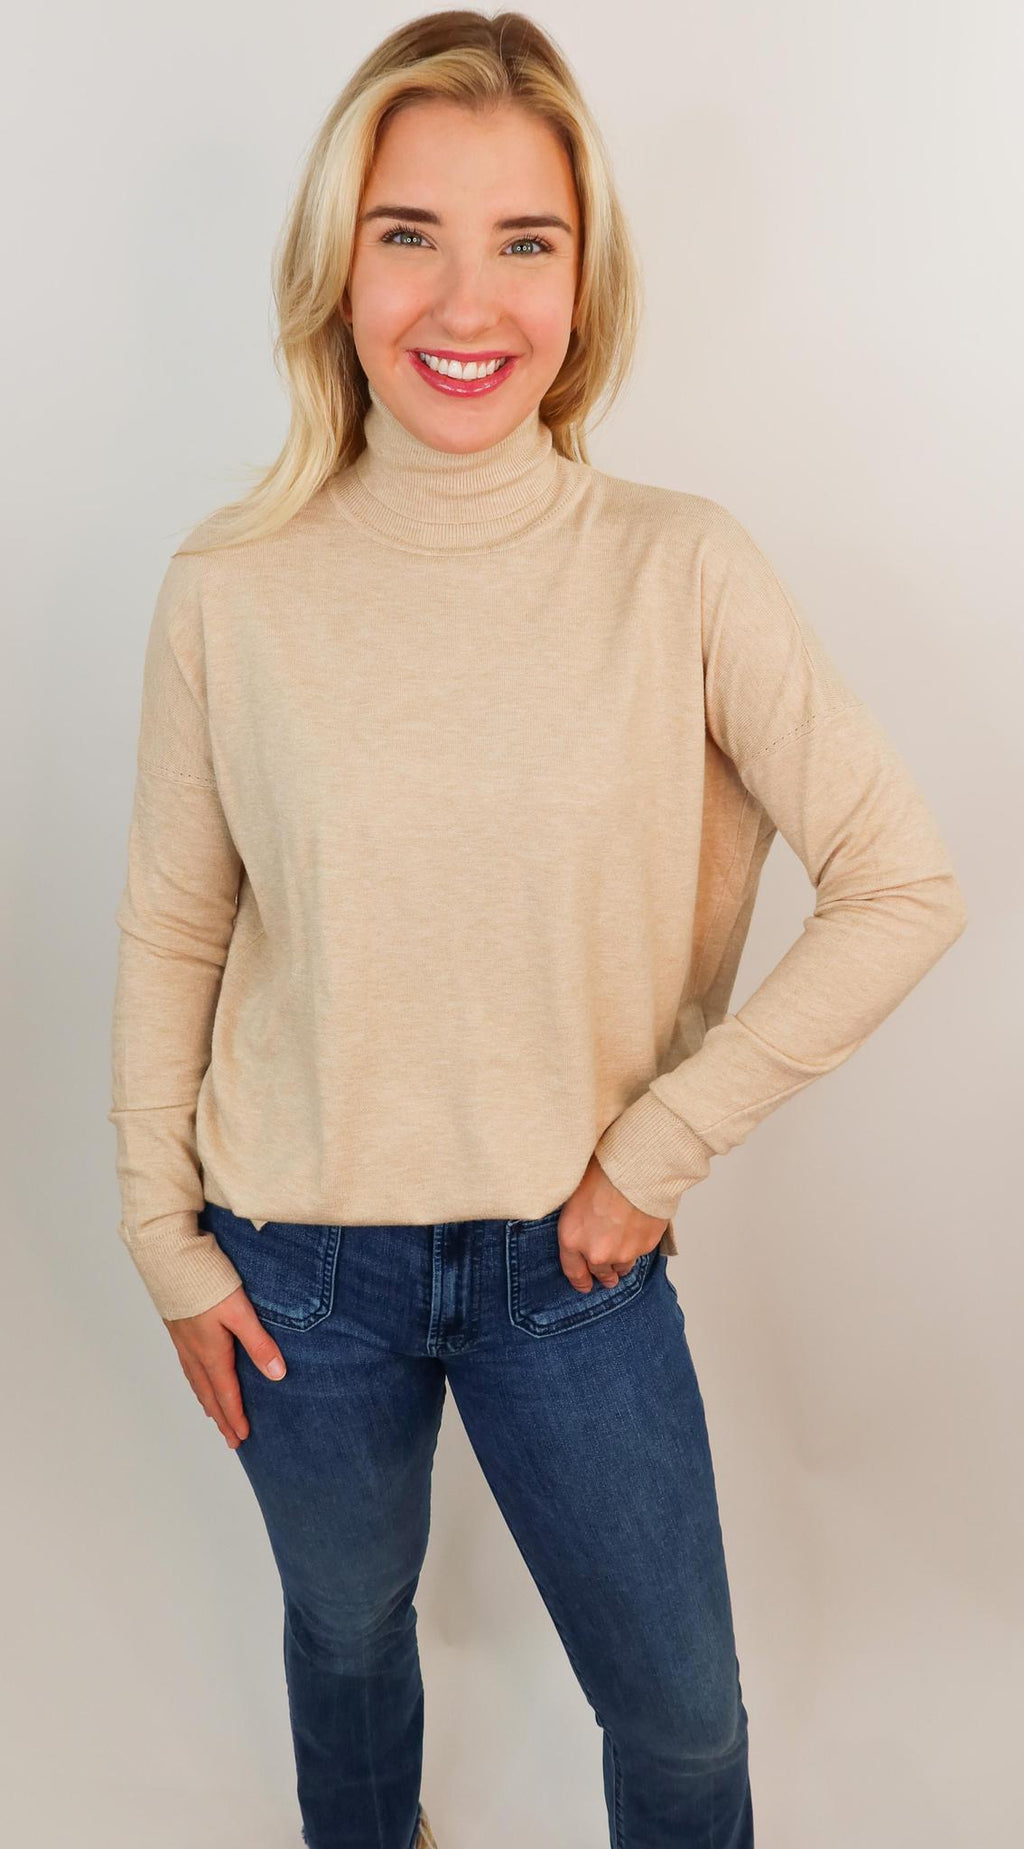 Oatmeal Karlie Turtleneck Sweater- THE SOFTEST SWEATER EVR!!!